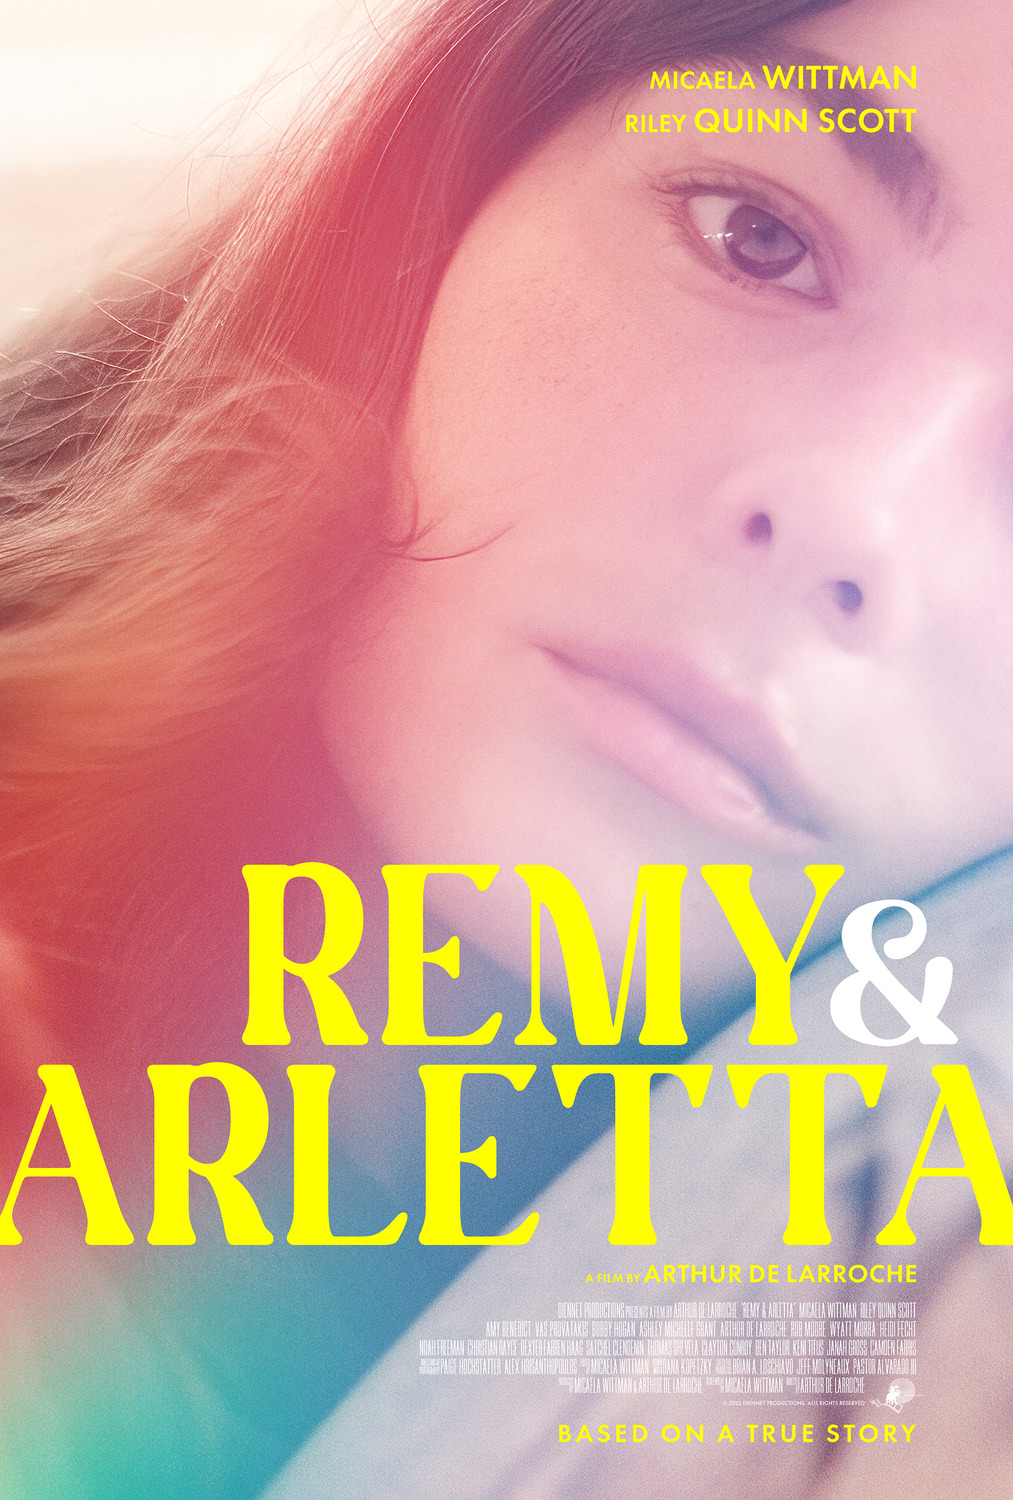 Extra Large Movie Poster Image for Remy & Arletta 